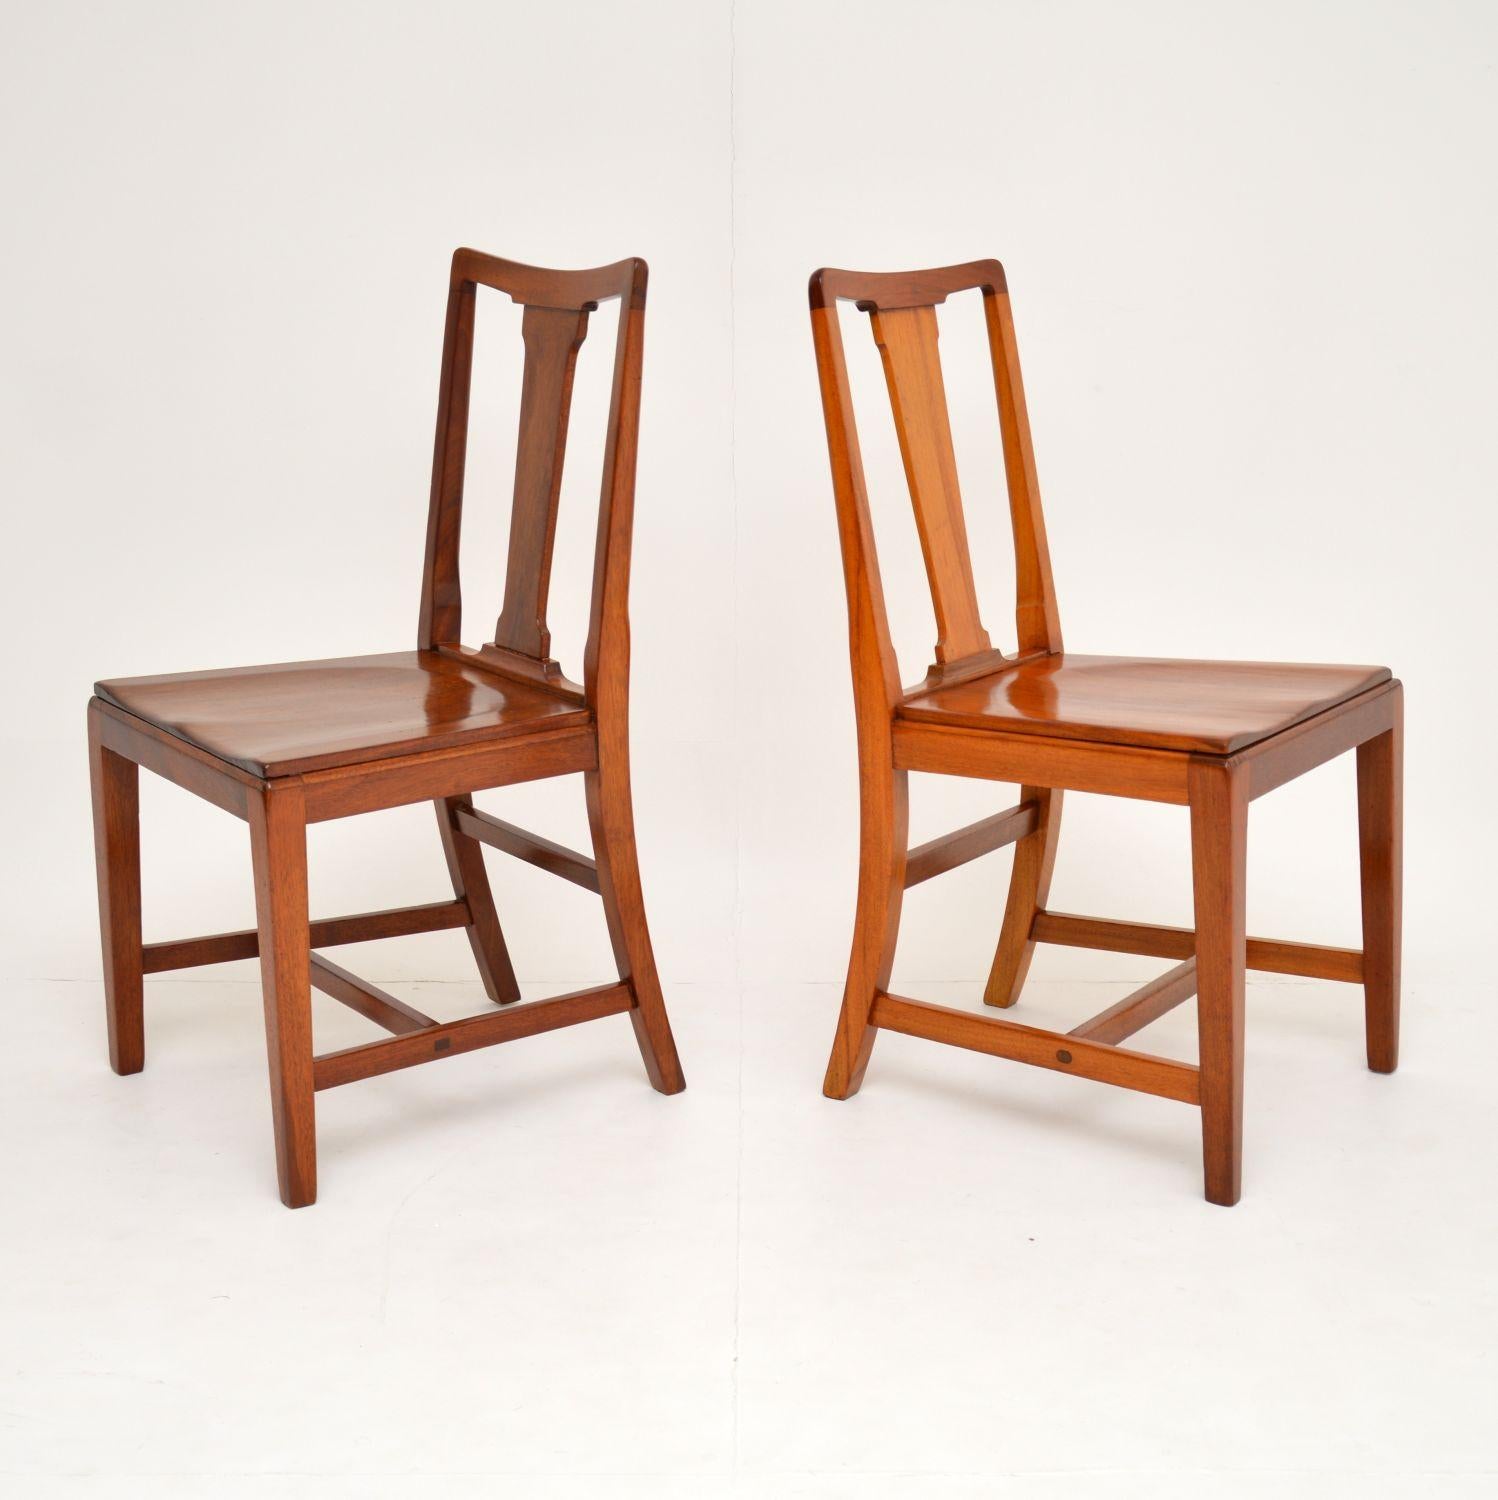 British Pair of Art Deco Vintage Solid Mahogany Side Chairs